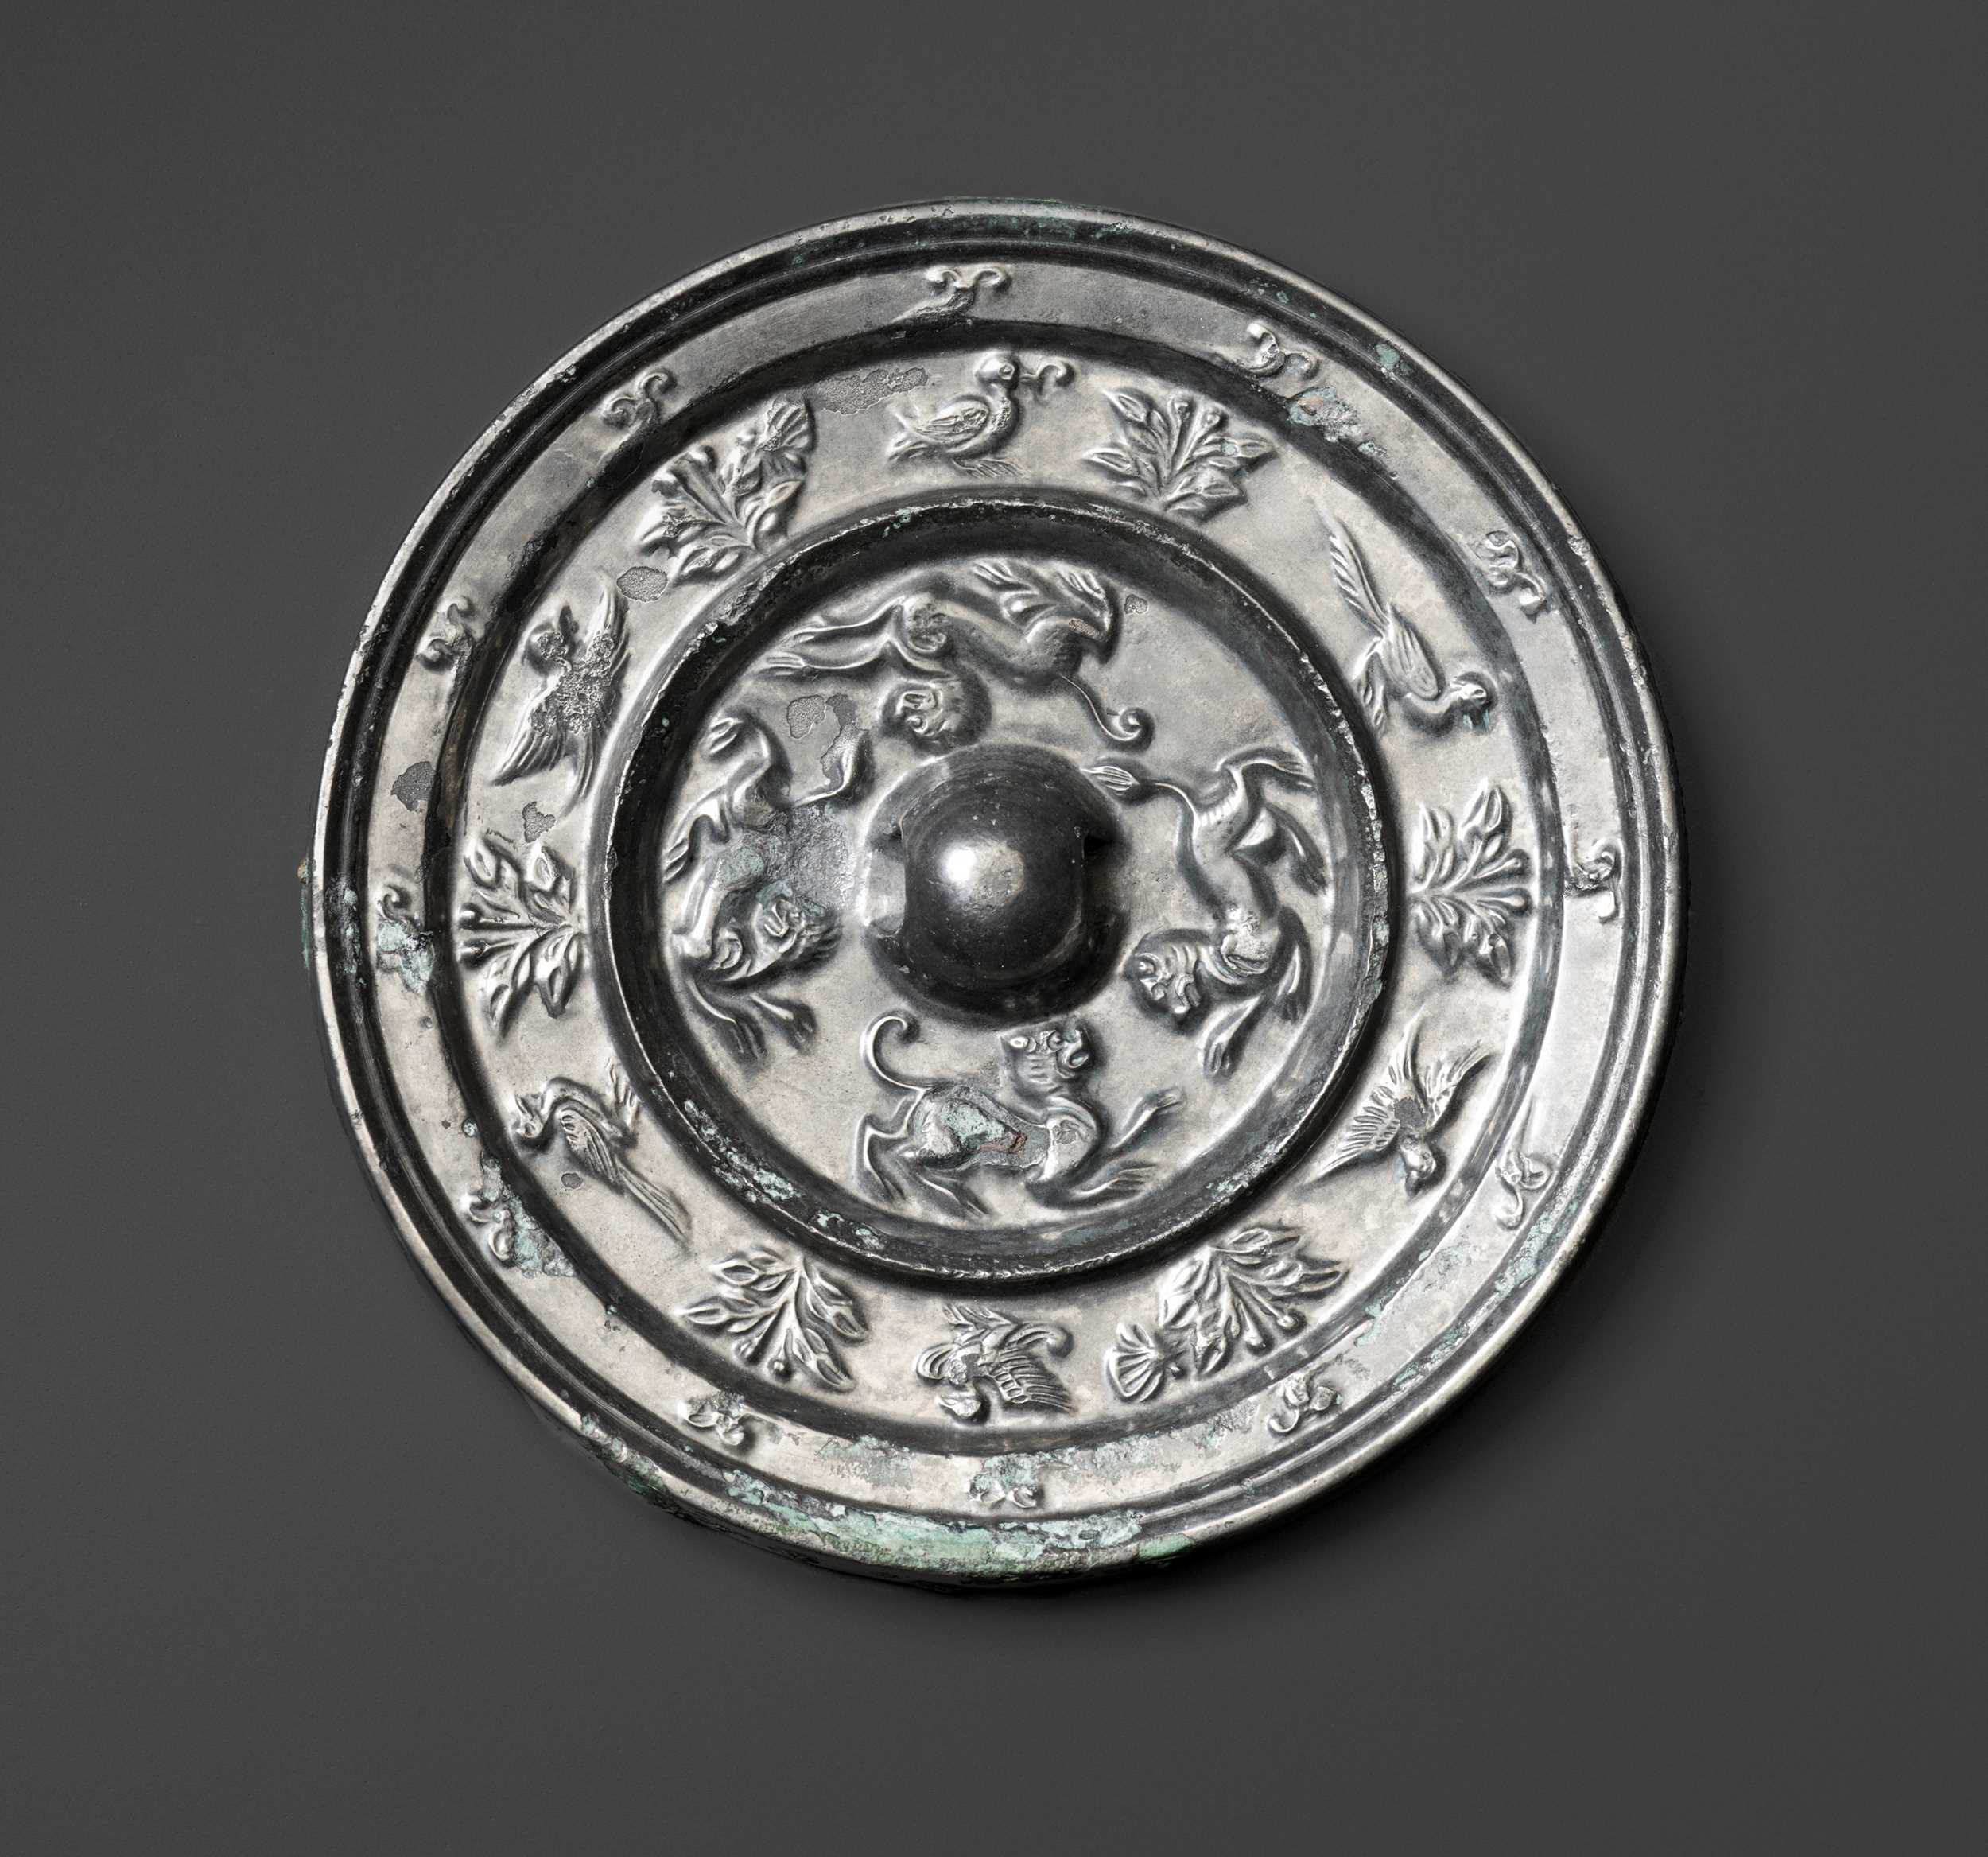 Lot 42 - A SILVERED BRONZE ‘MYTHICAL BEASTS’ MIRROR, TANG DYNASTY